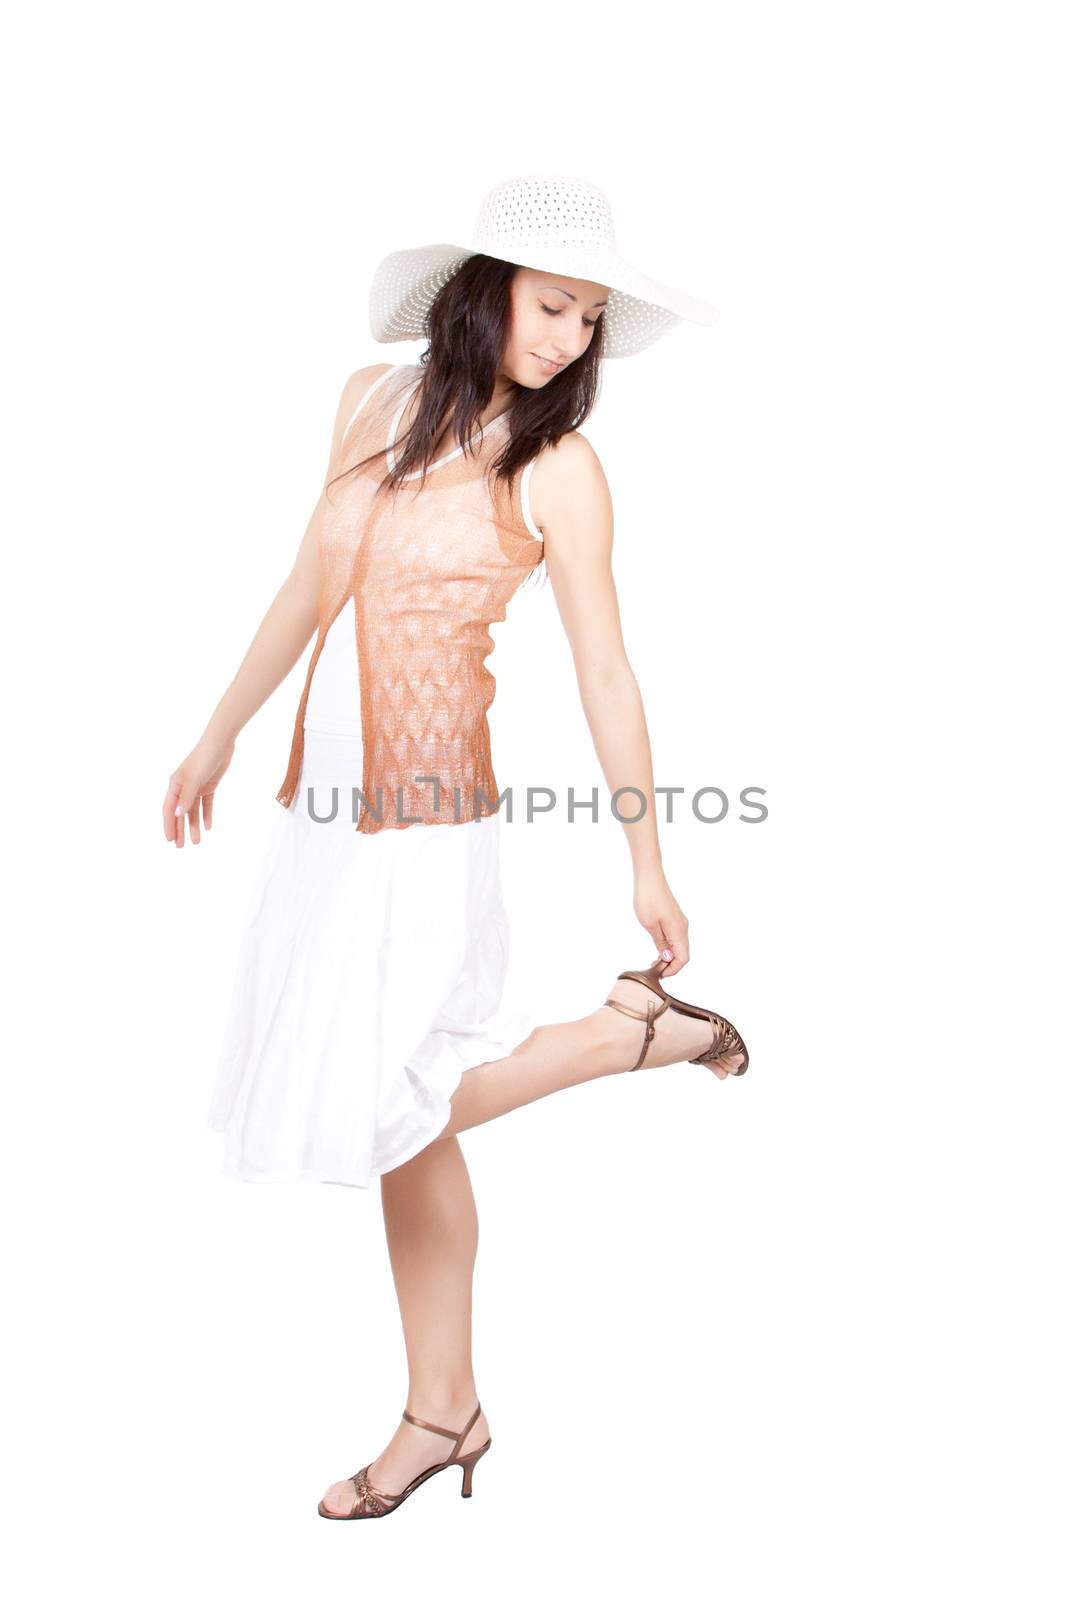 Brunette woman in white sun hat in a white dress, on white background, looking at the raised leg heel